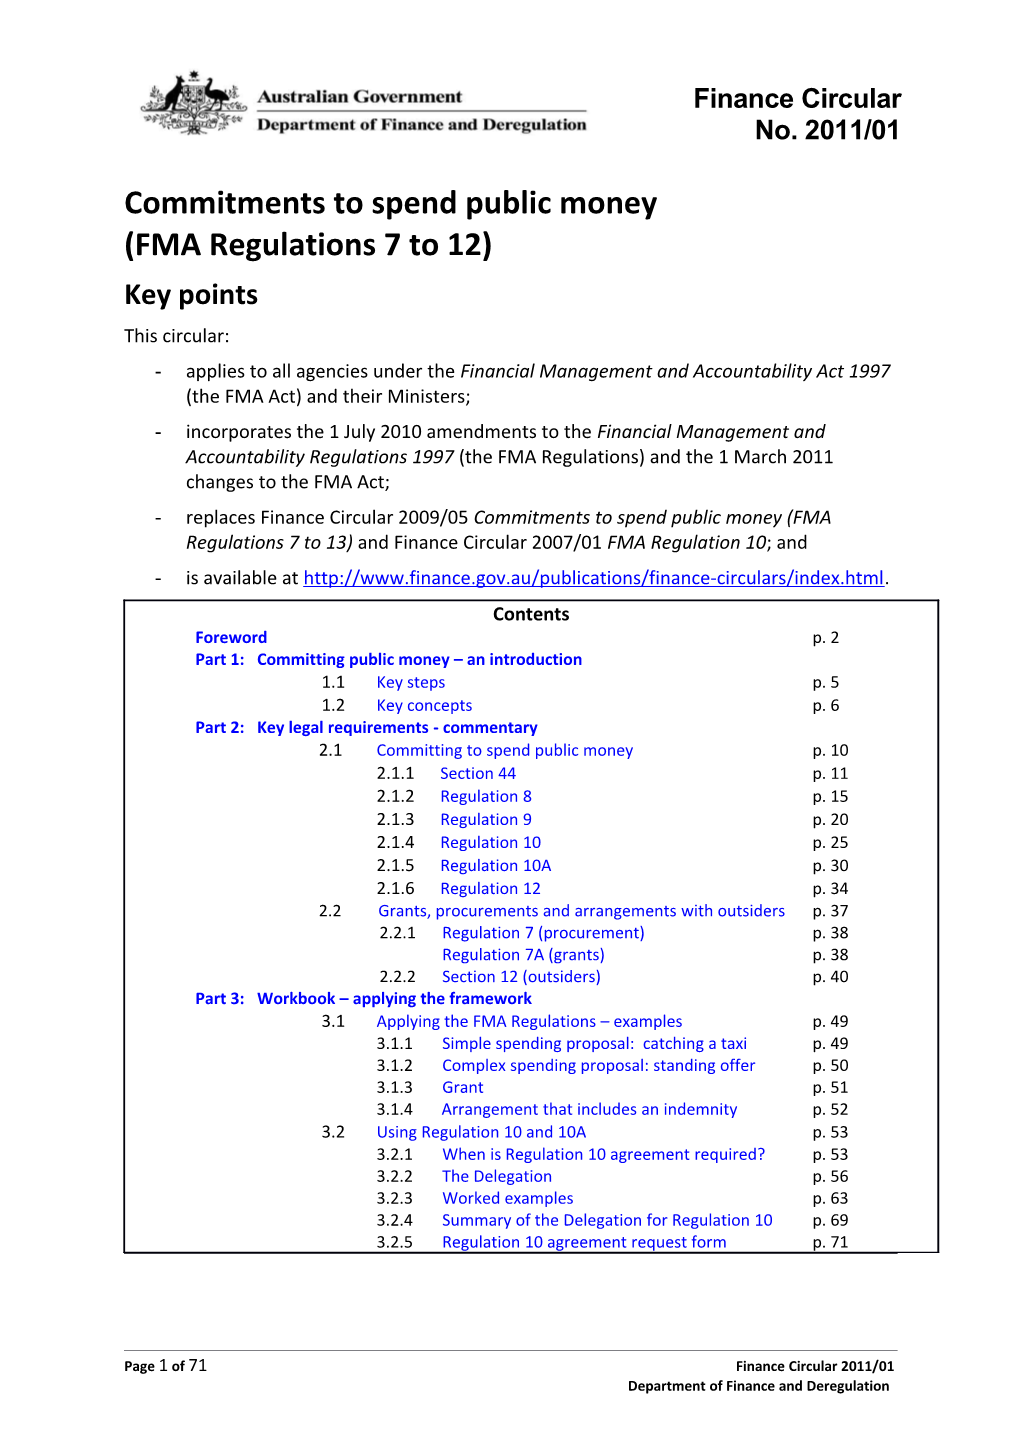 Finance Circular 2011/01: Commitments to Spend Public Money (FMA Regulations 7 to 12)